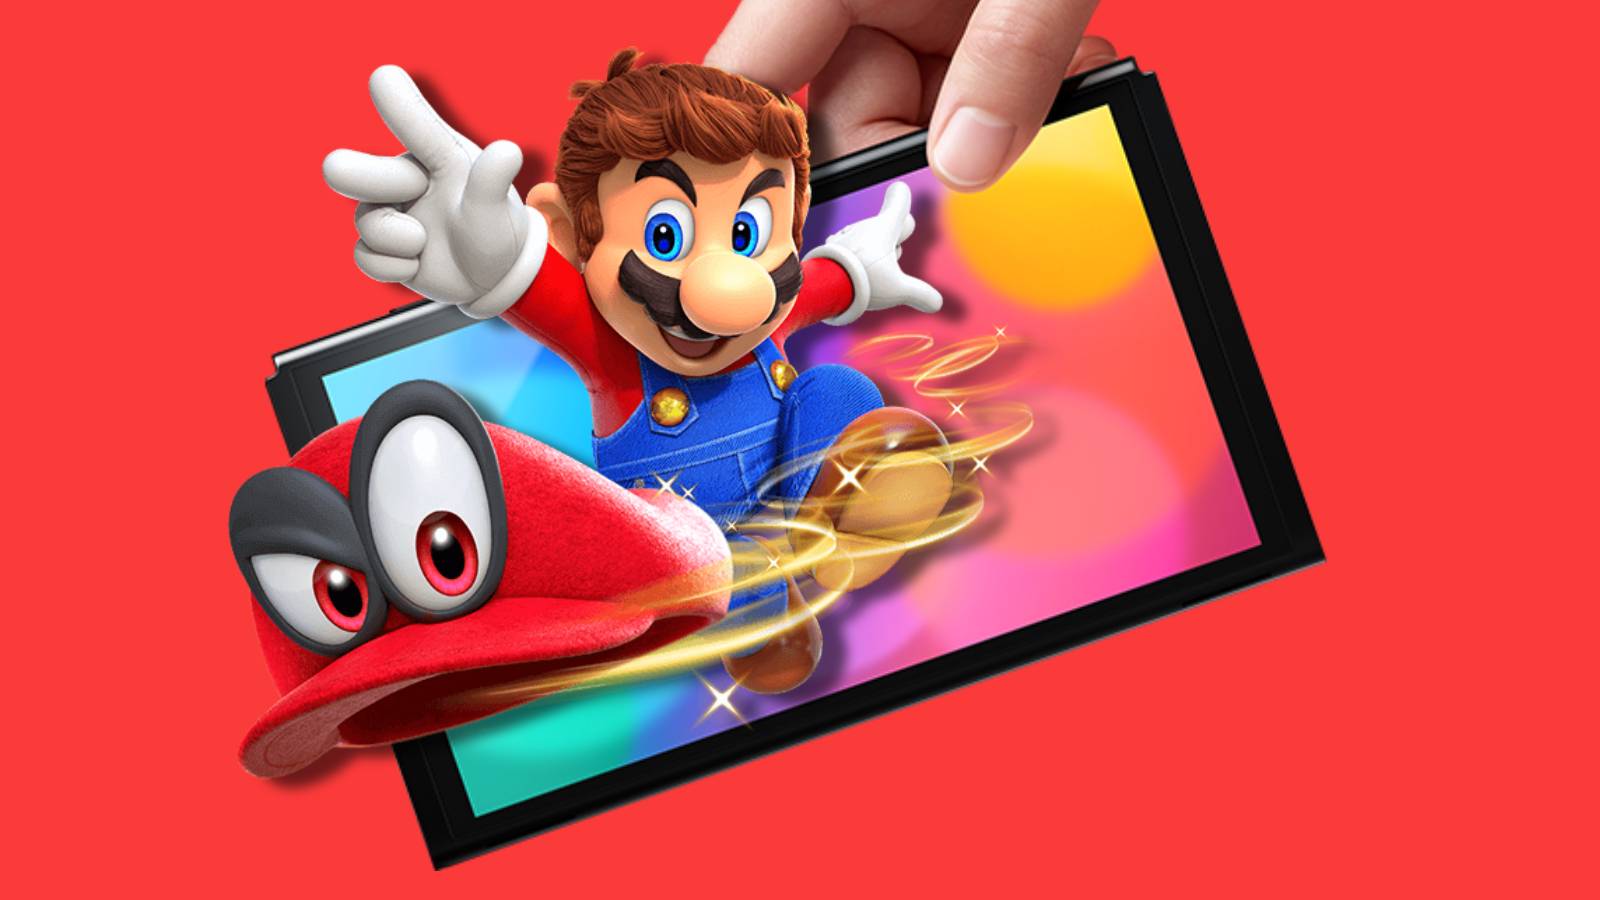 Mario leaps out of a Nintendo Switch OLED Model